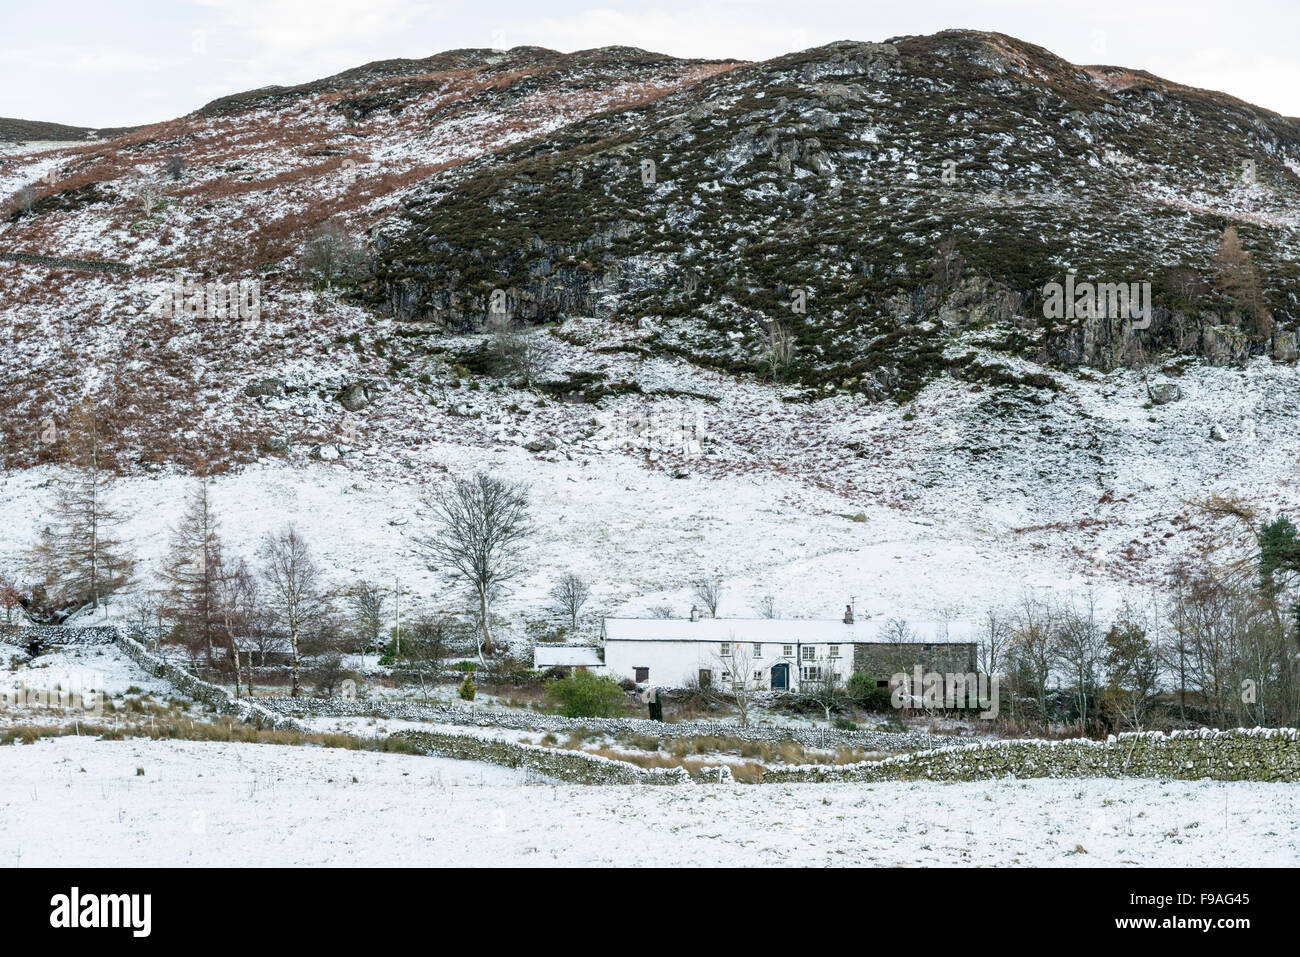 A snowy landscape of Cumbrian farms, buildings and mountains near Matterdale in Cumbria UK Stock Photo